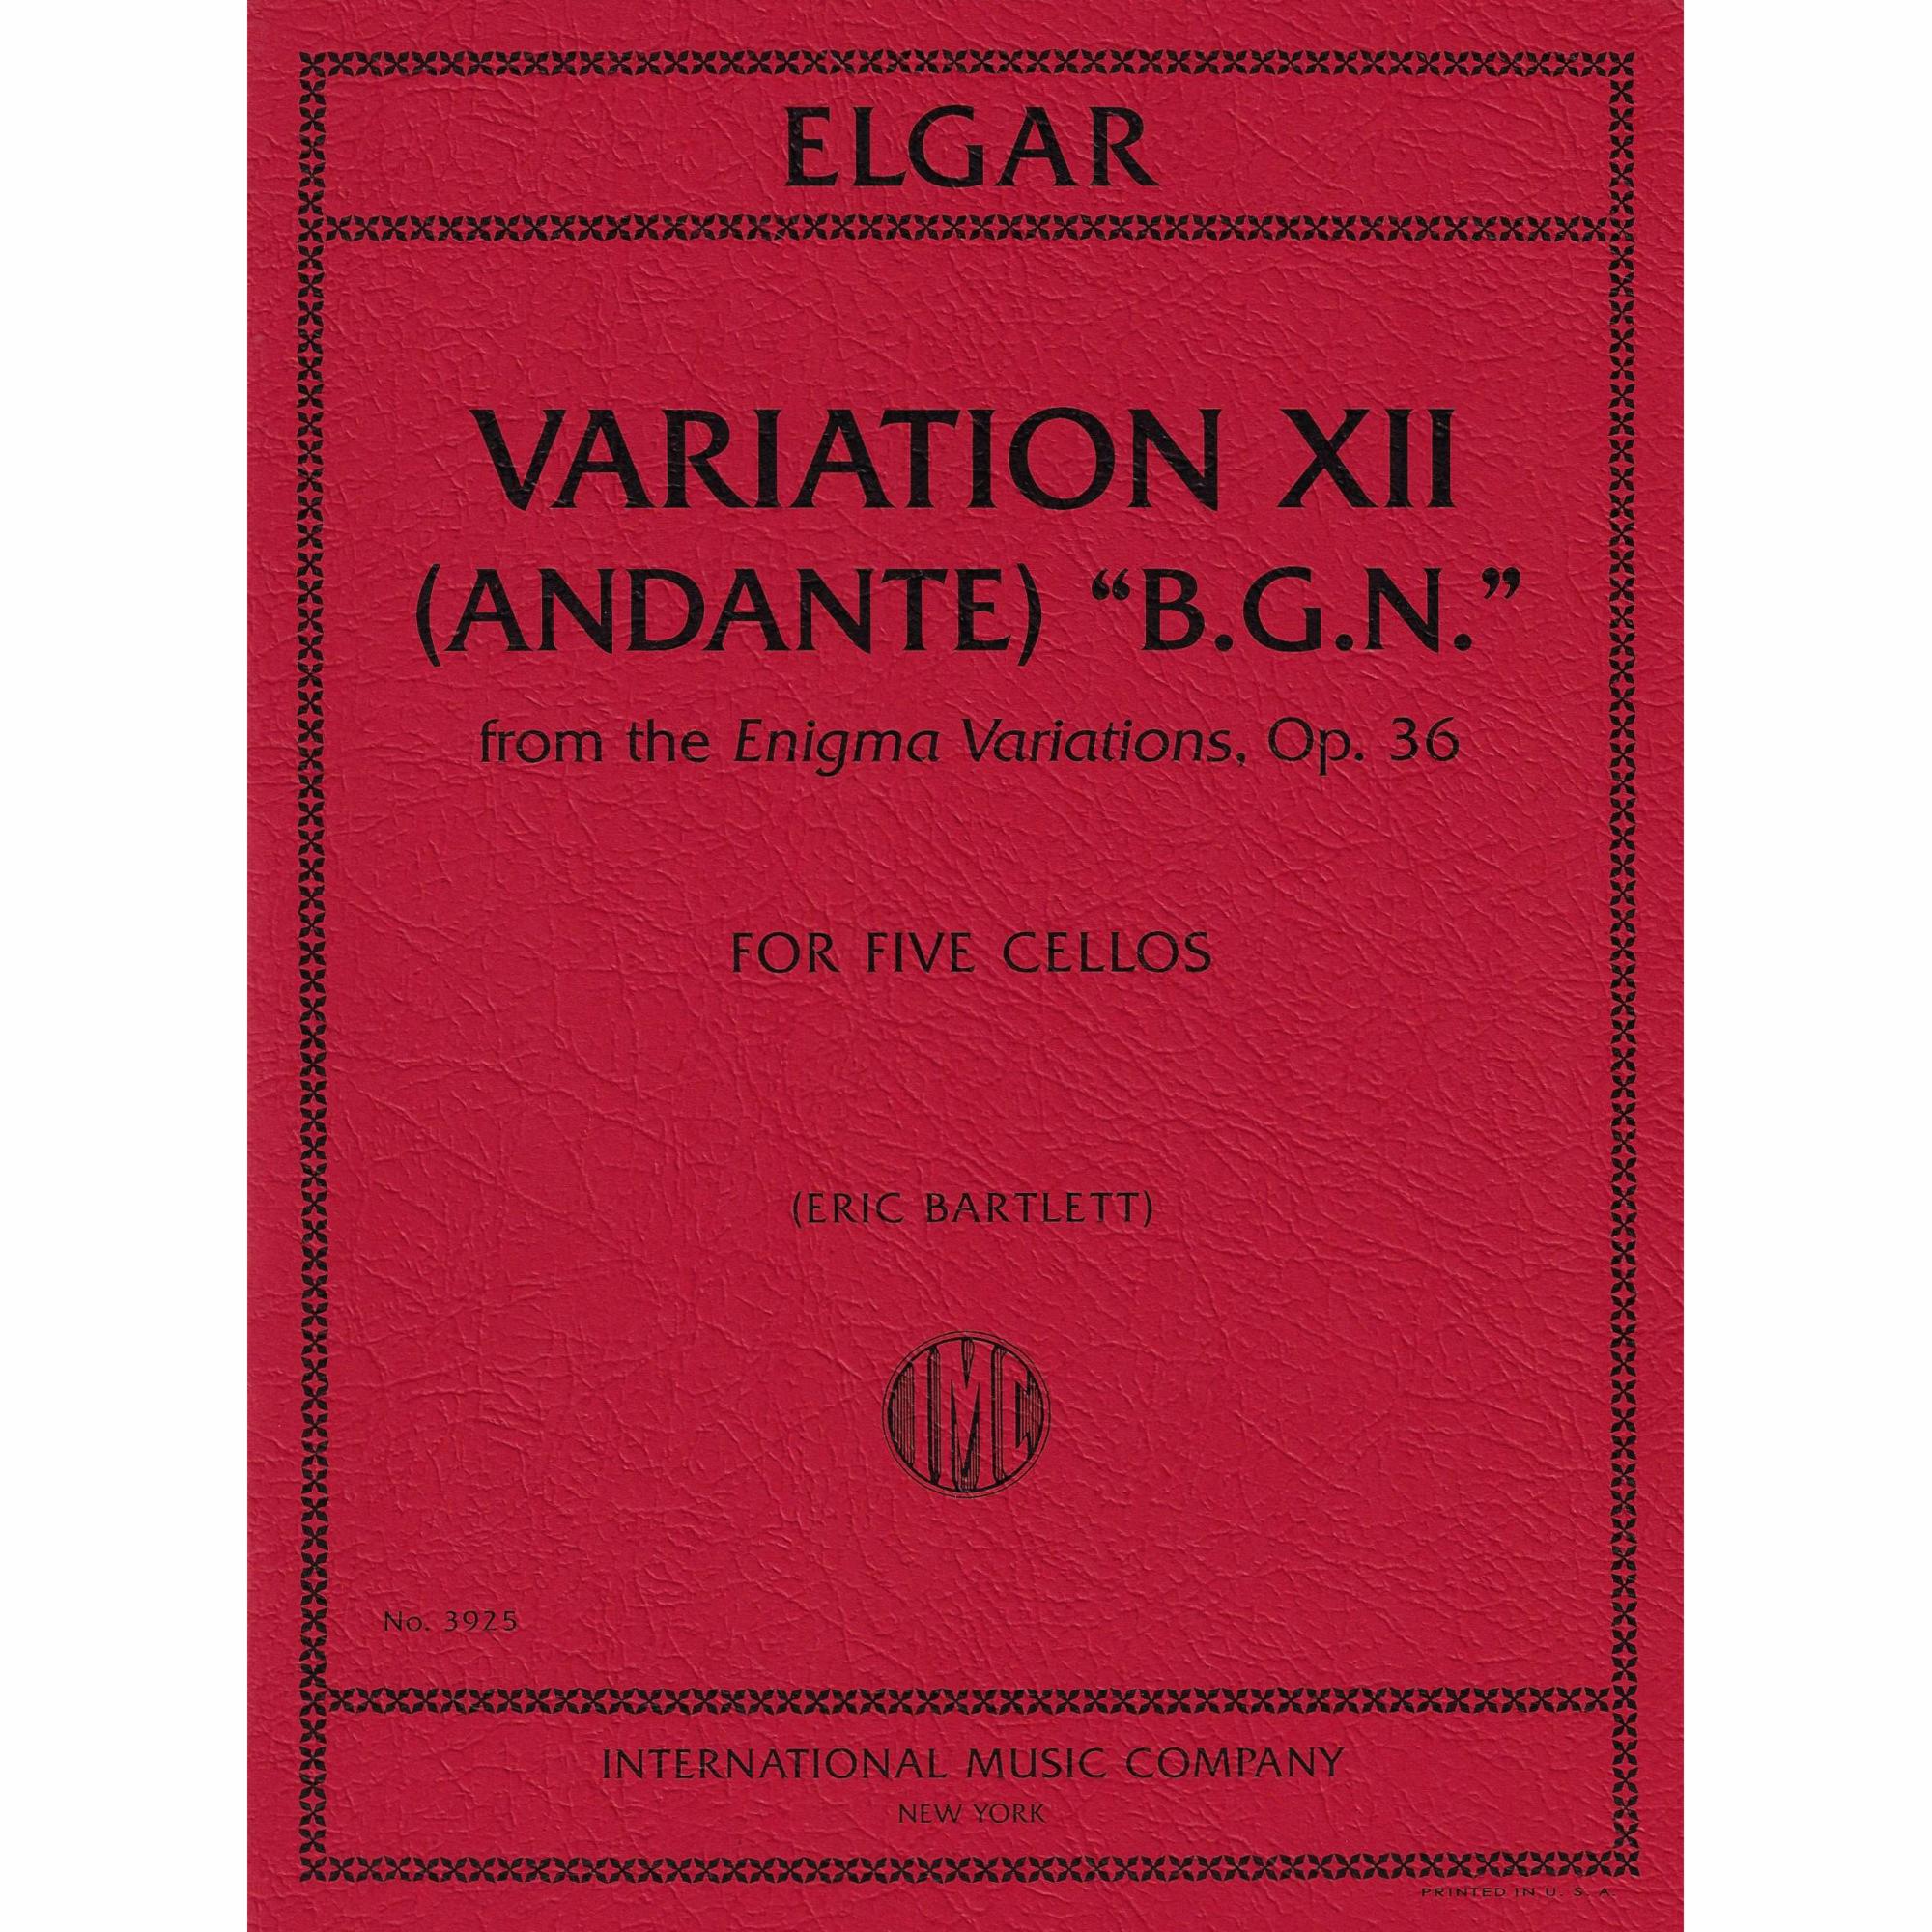 Elgar -- Variation XII, from Enigma Variations for Five Cellos